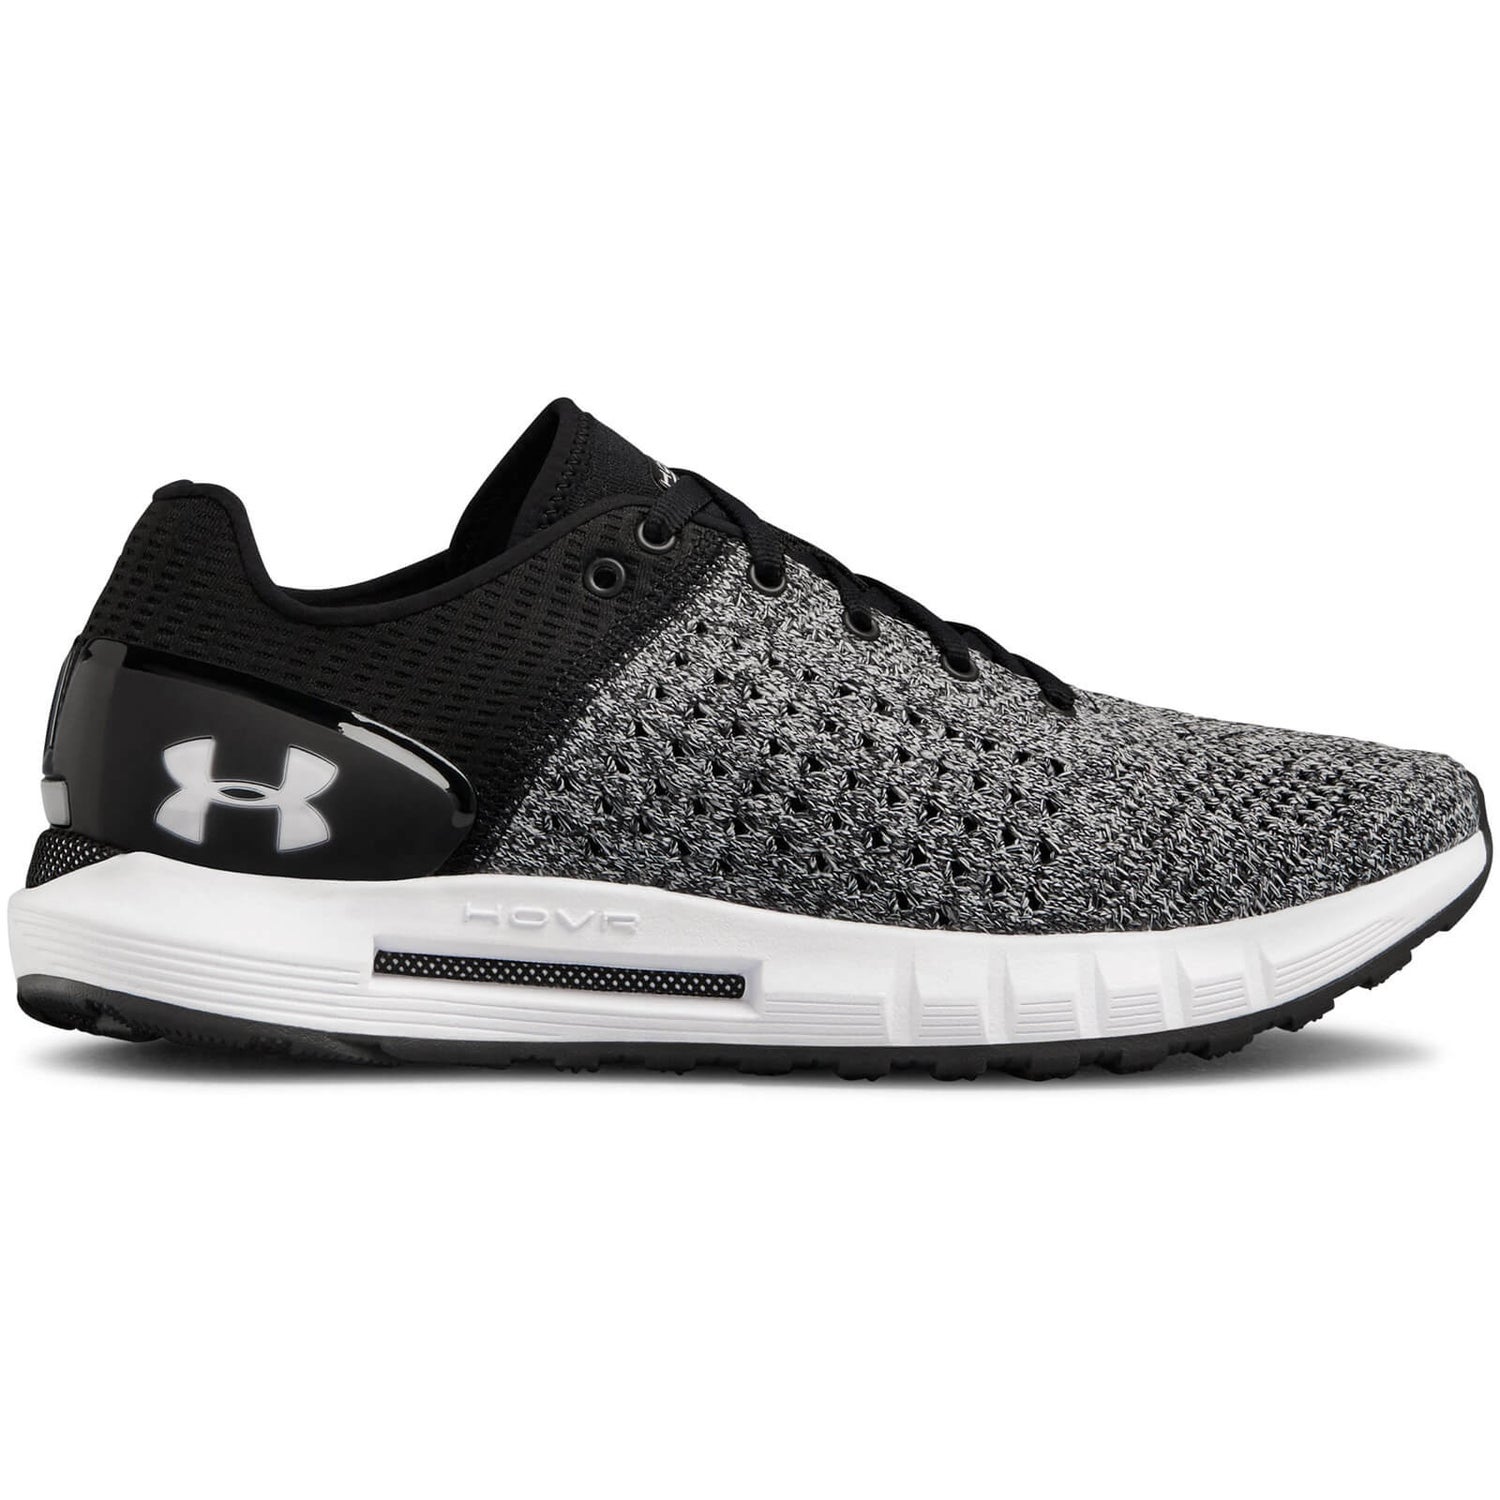 Under Armour Women's HOVR Sonic NC Running Shoes - Black/White ...